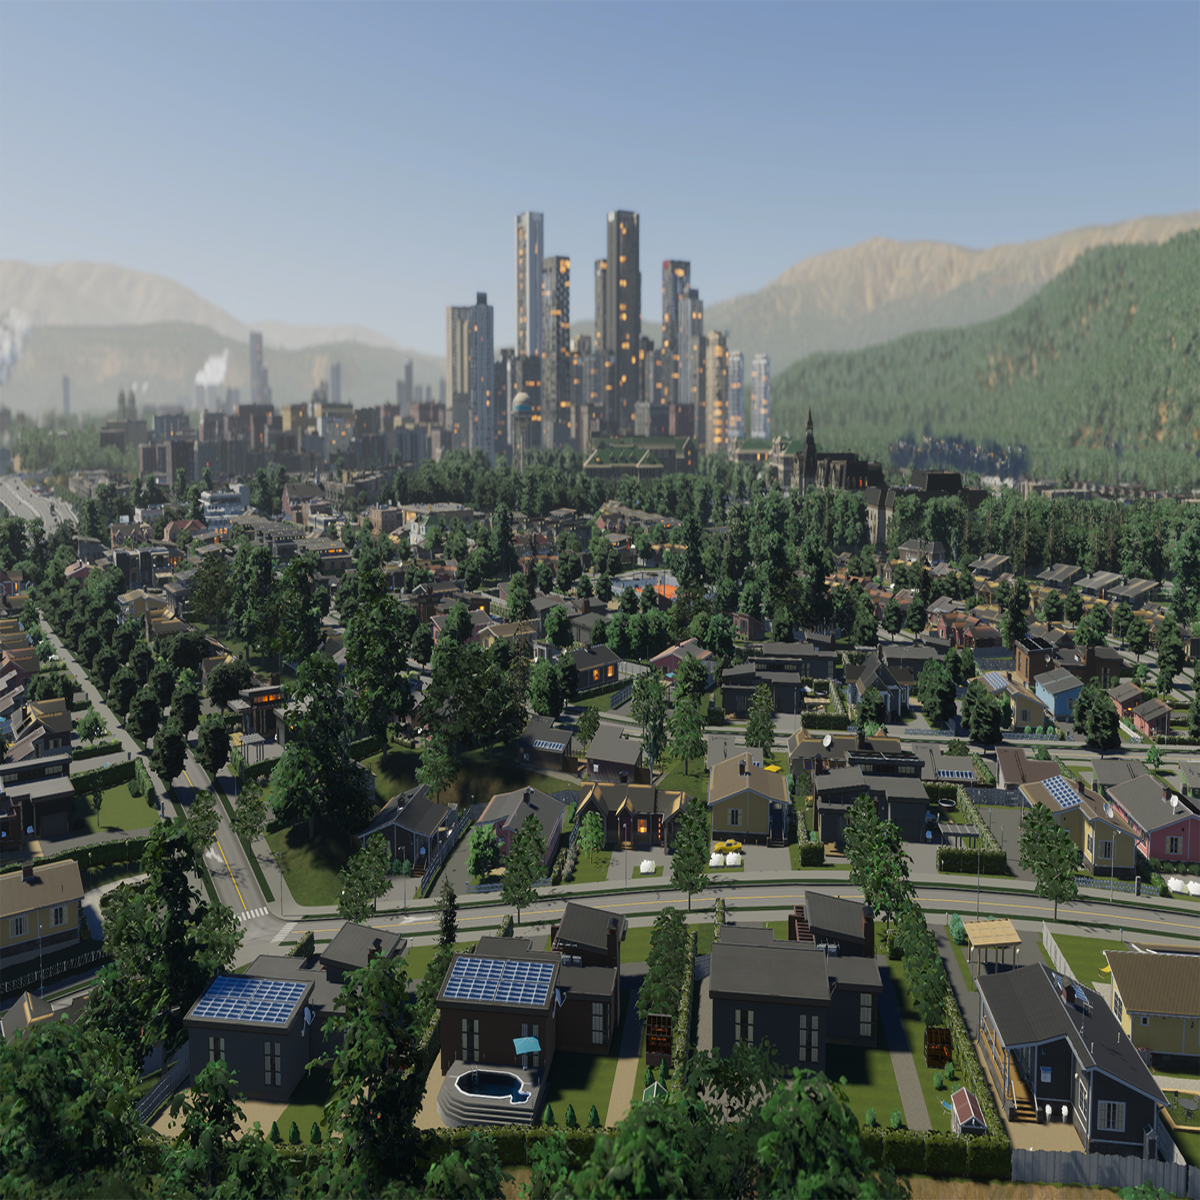 Cities Skylines 2 mods explained